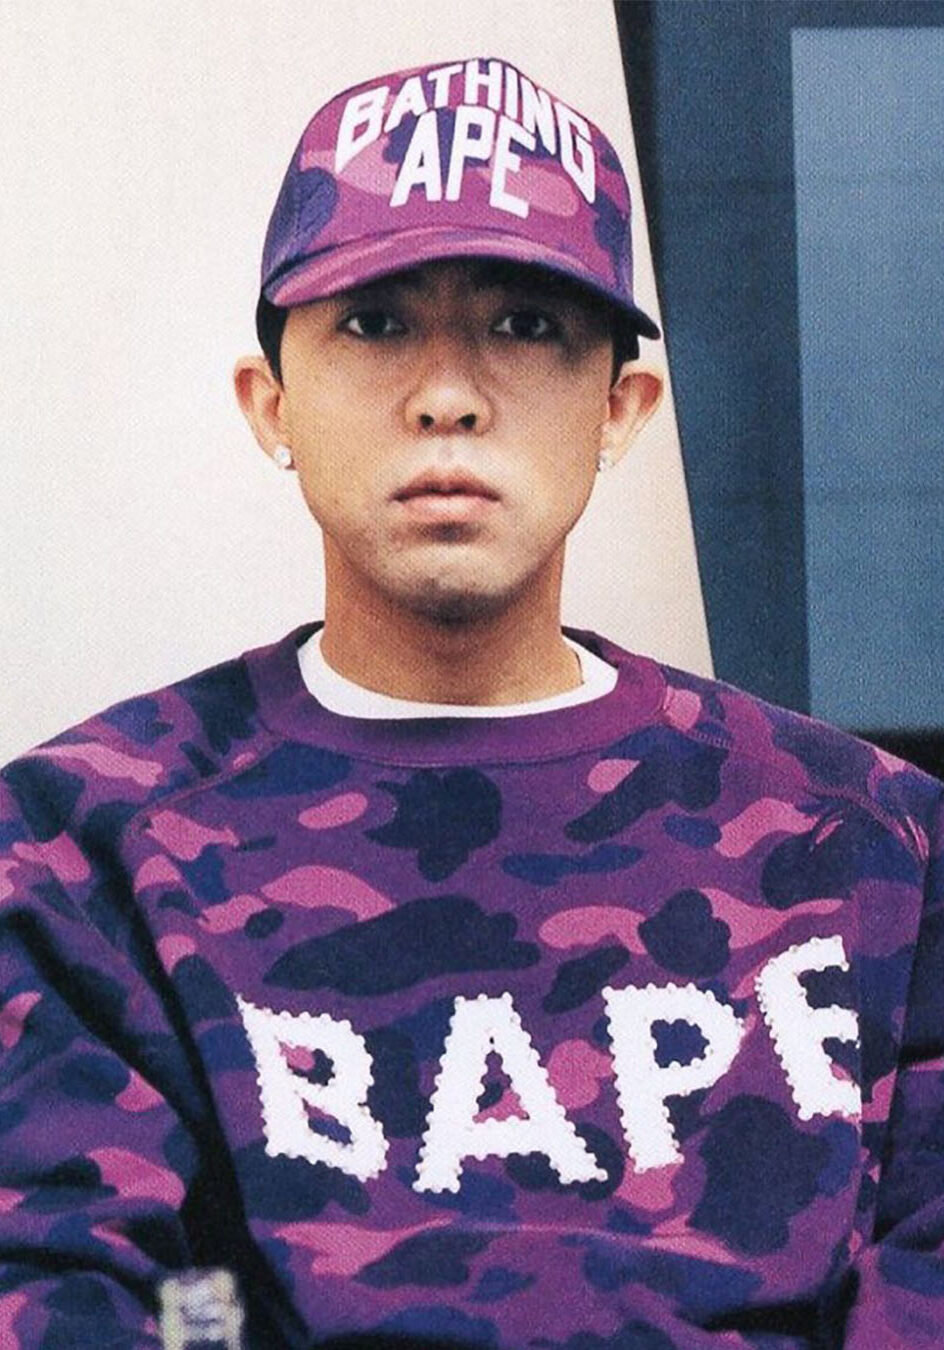 Nigo and Nike may Just Do It - Archive Blog